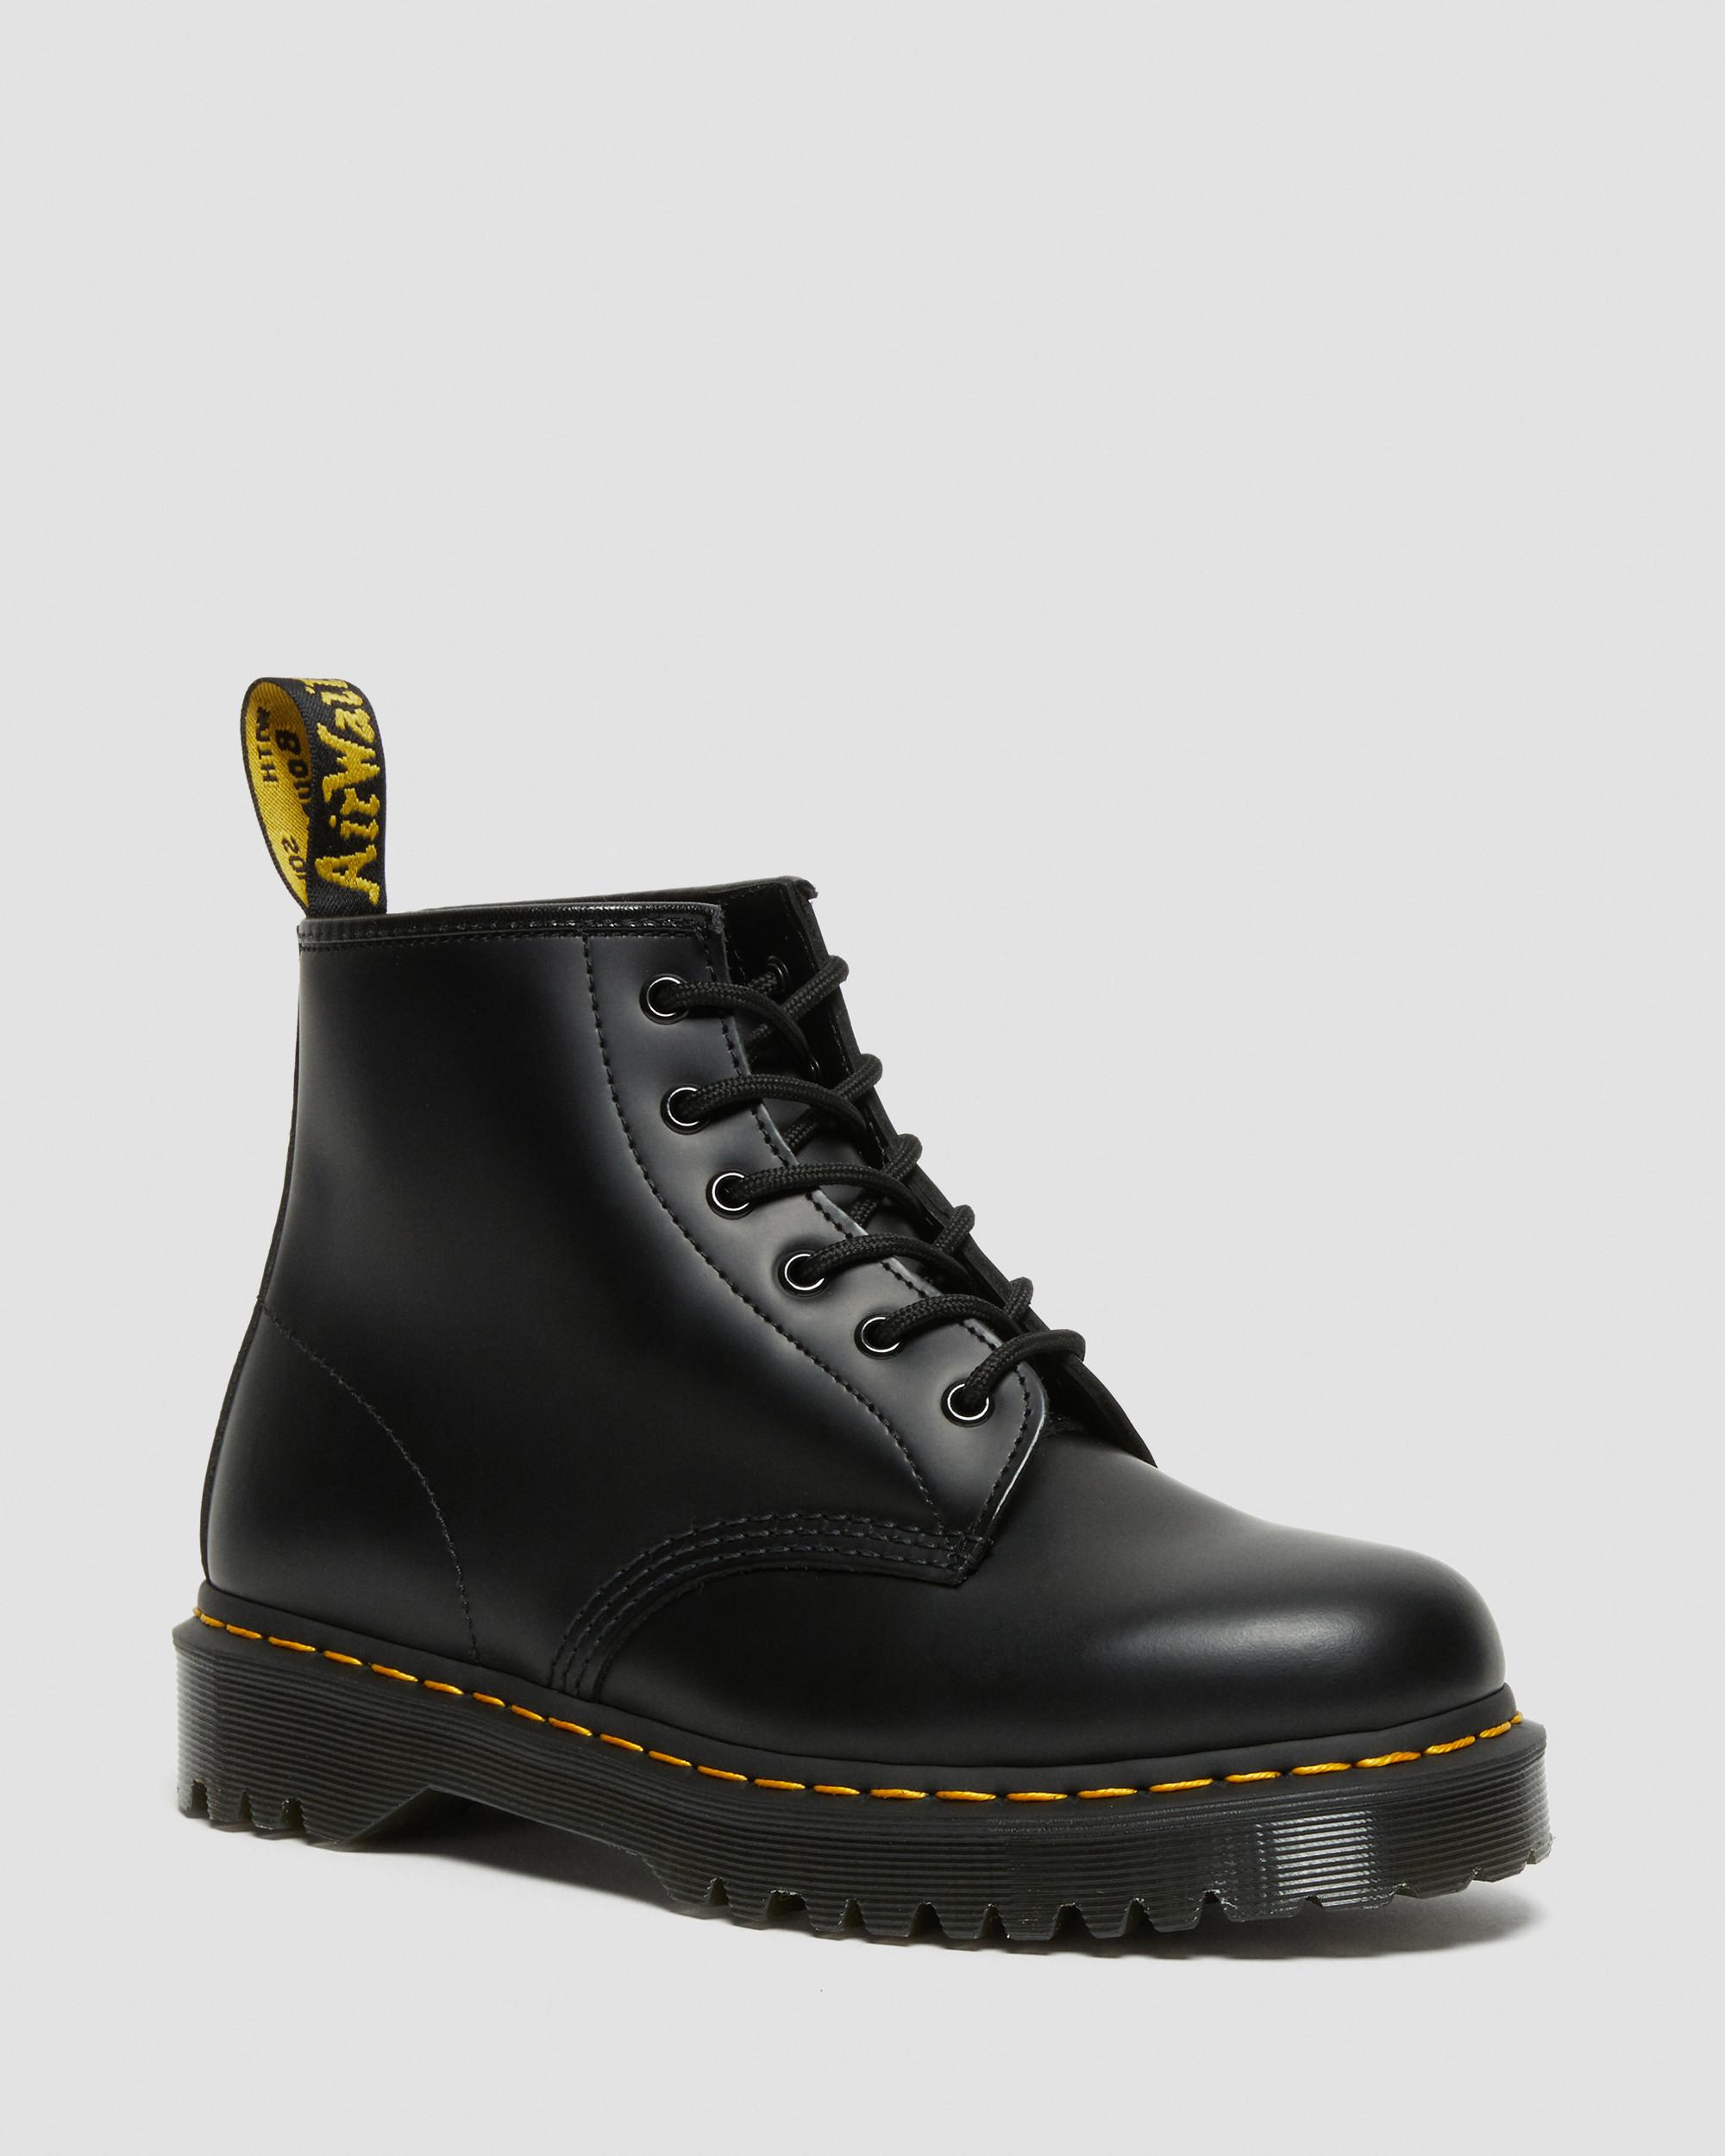 haga turismo Automático ilegal 101 Bex Smooth Leather Ankle Boots | Dr. Martens